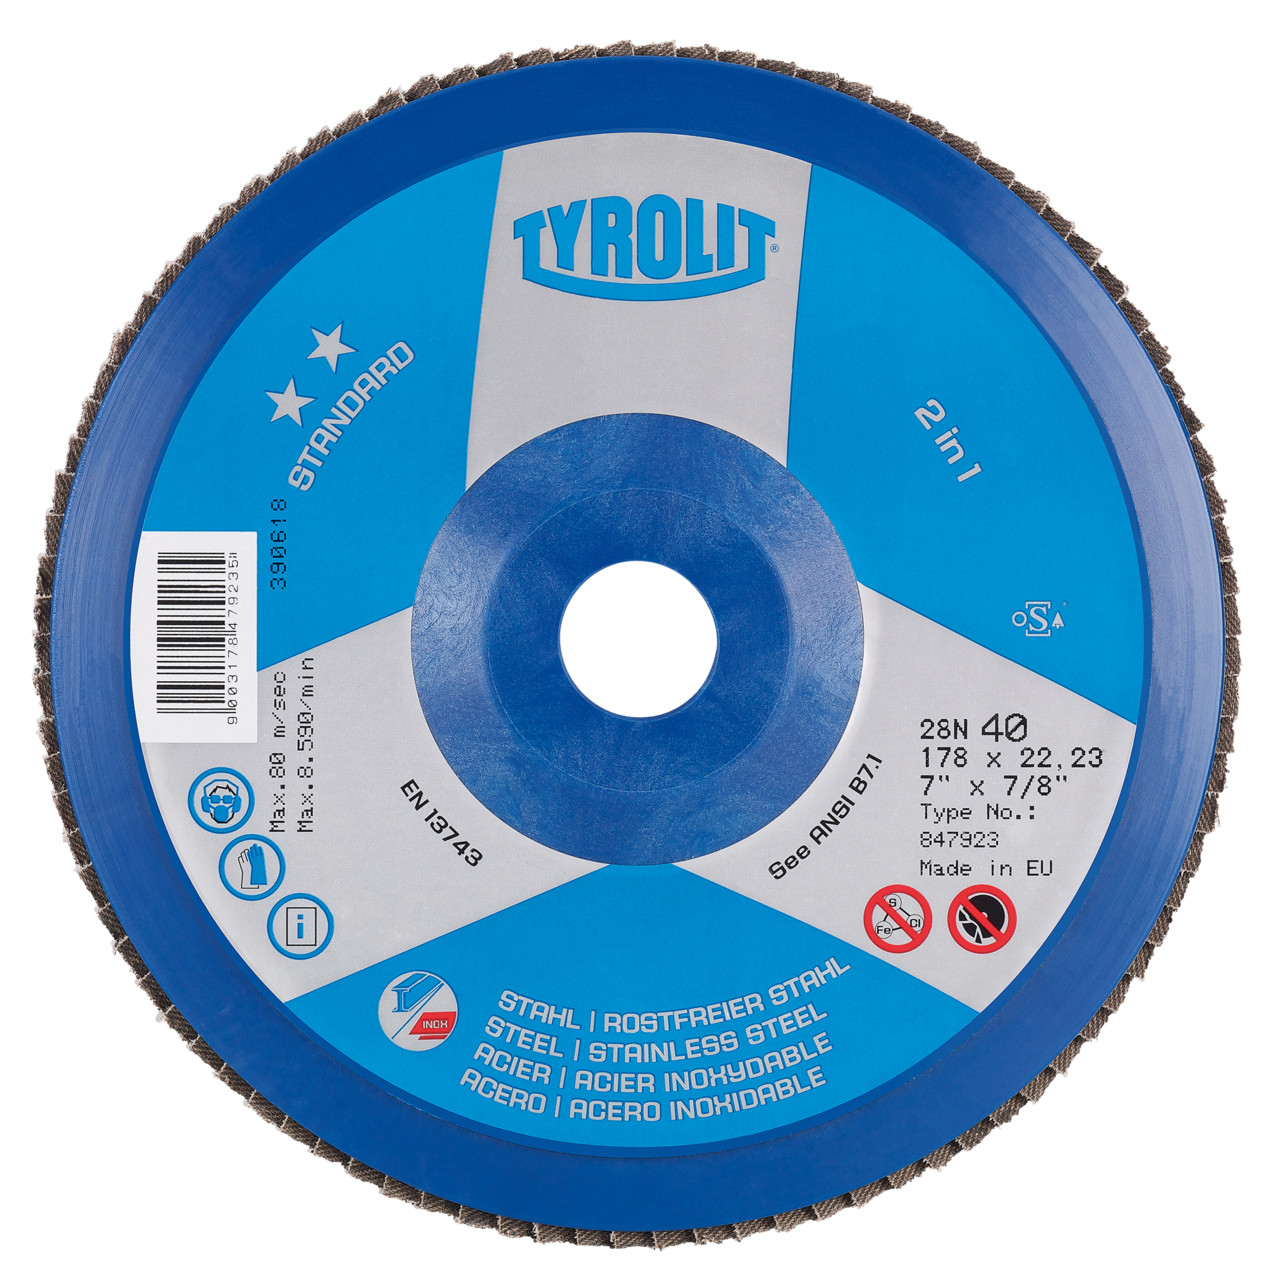 Tyrolit Serrated lock washer DxH 178x22.2 2in1 for steel and stainless steel, P40, shape: 28N - straight version (plastic carrier body), Art. 847923